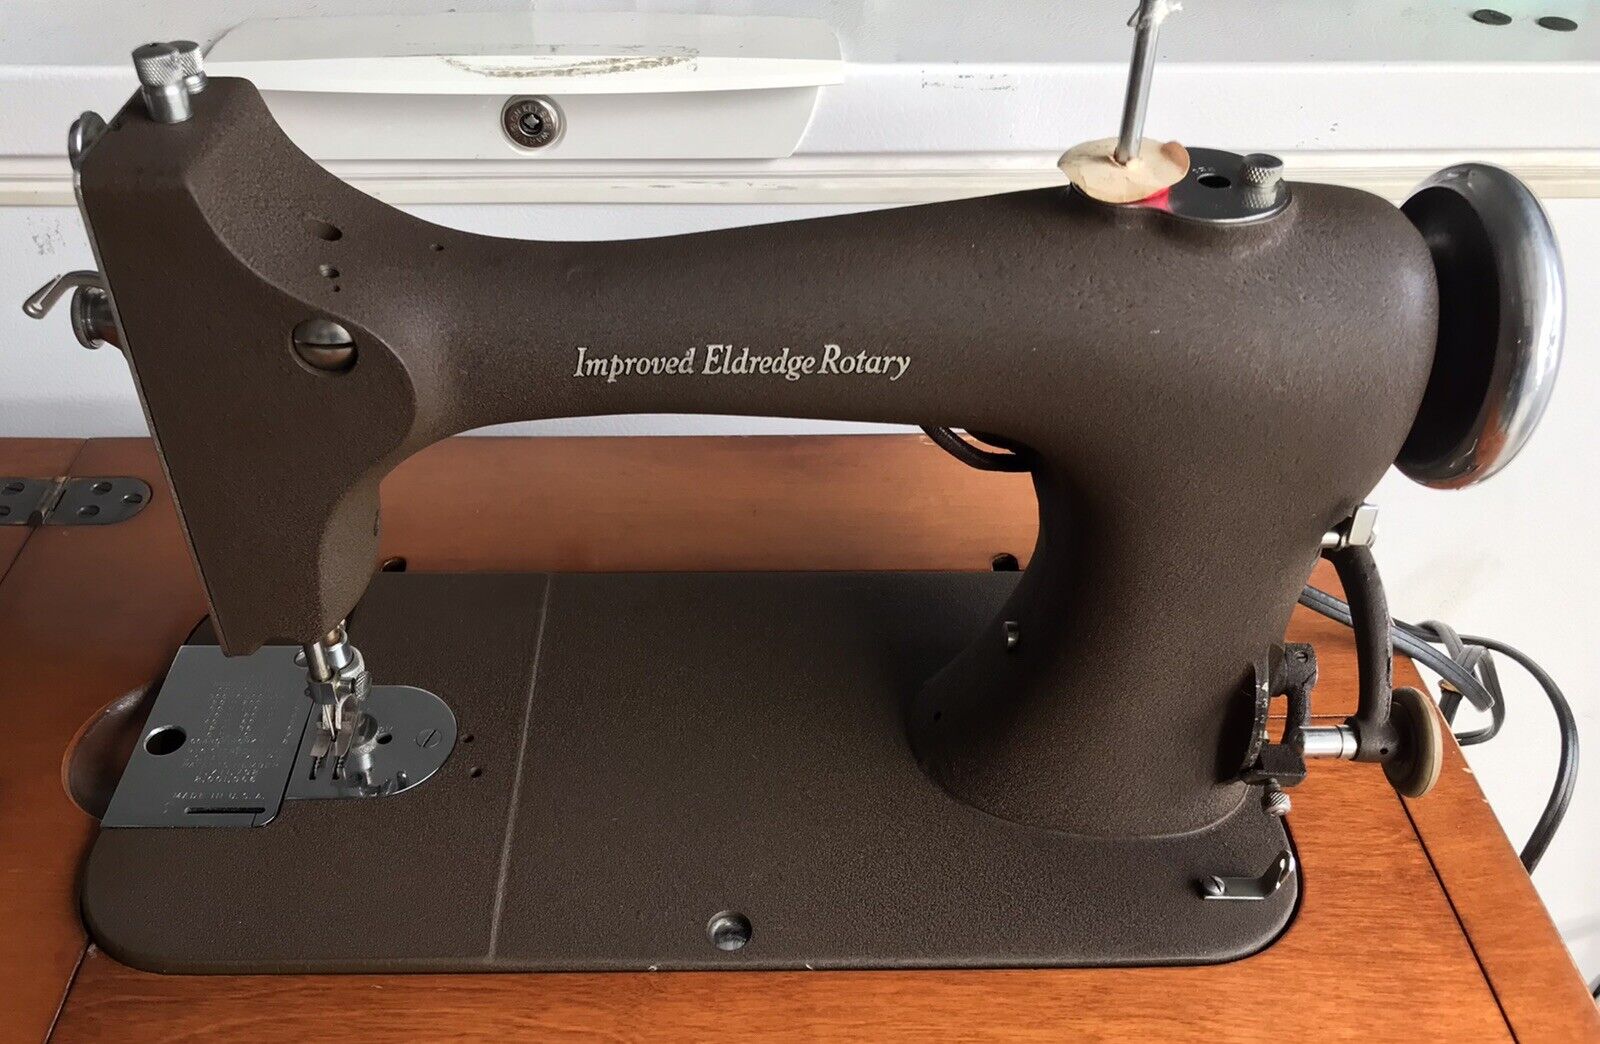 Vintage The Improved Eldredge Rotary Sewing Machine “Antique”